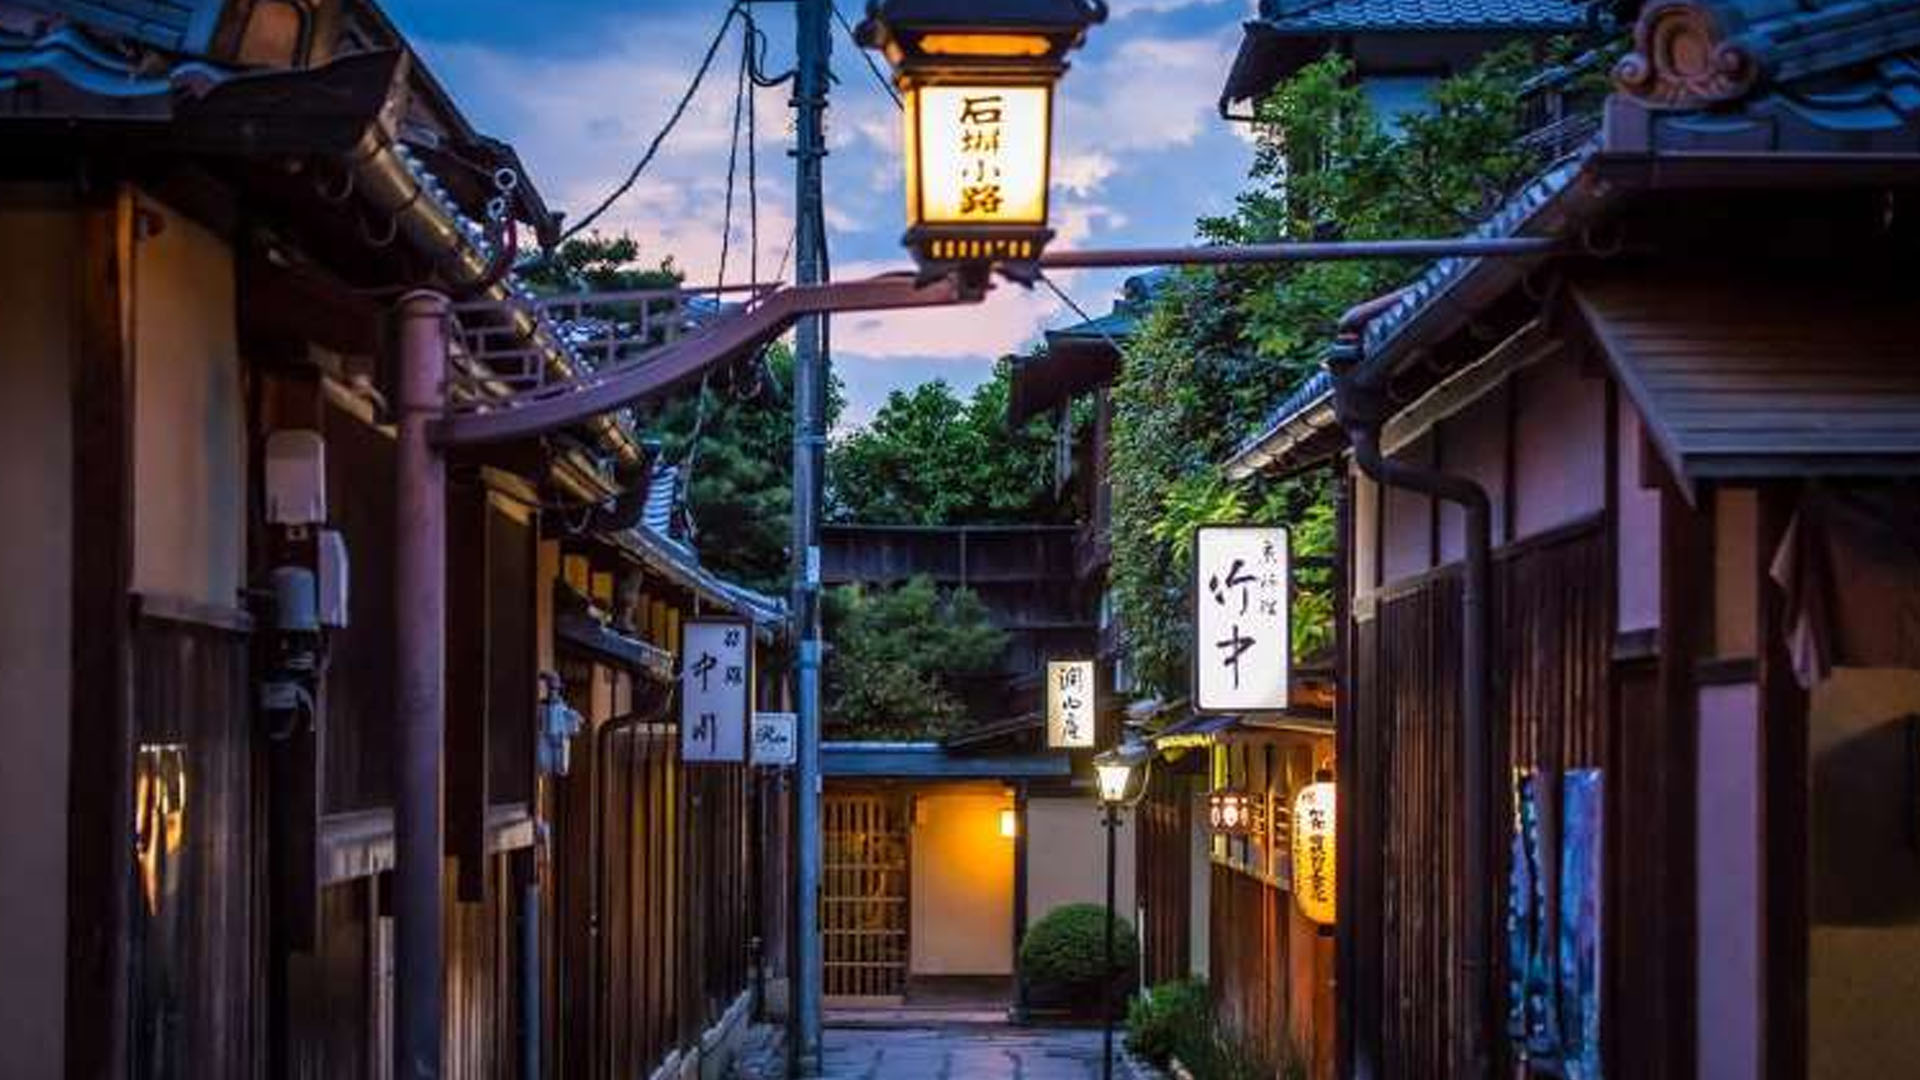 Kyoto launches an 'empty tourism' campaign amid coronavirus outbreak